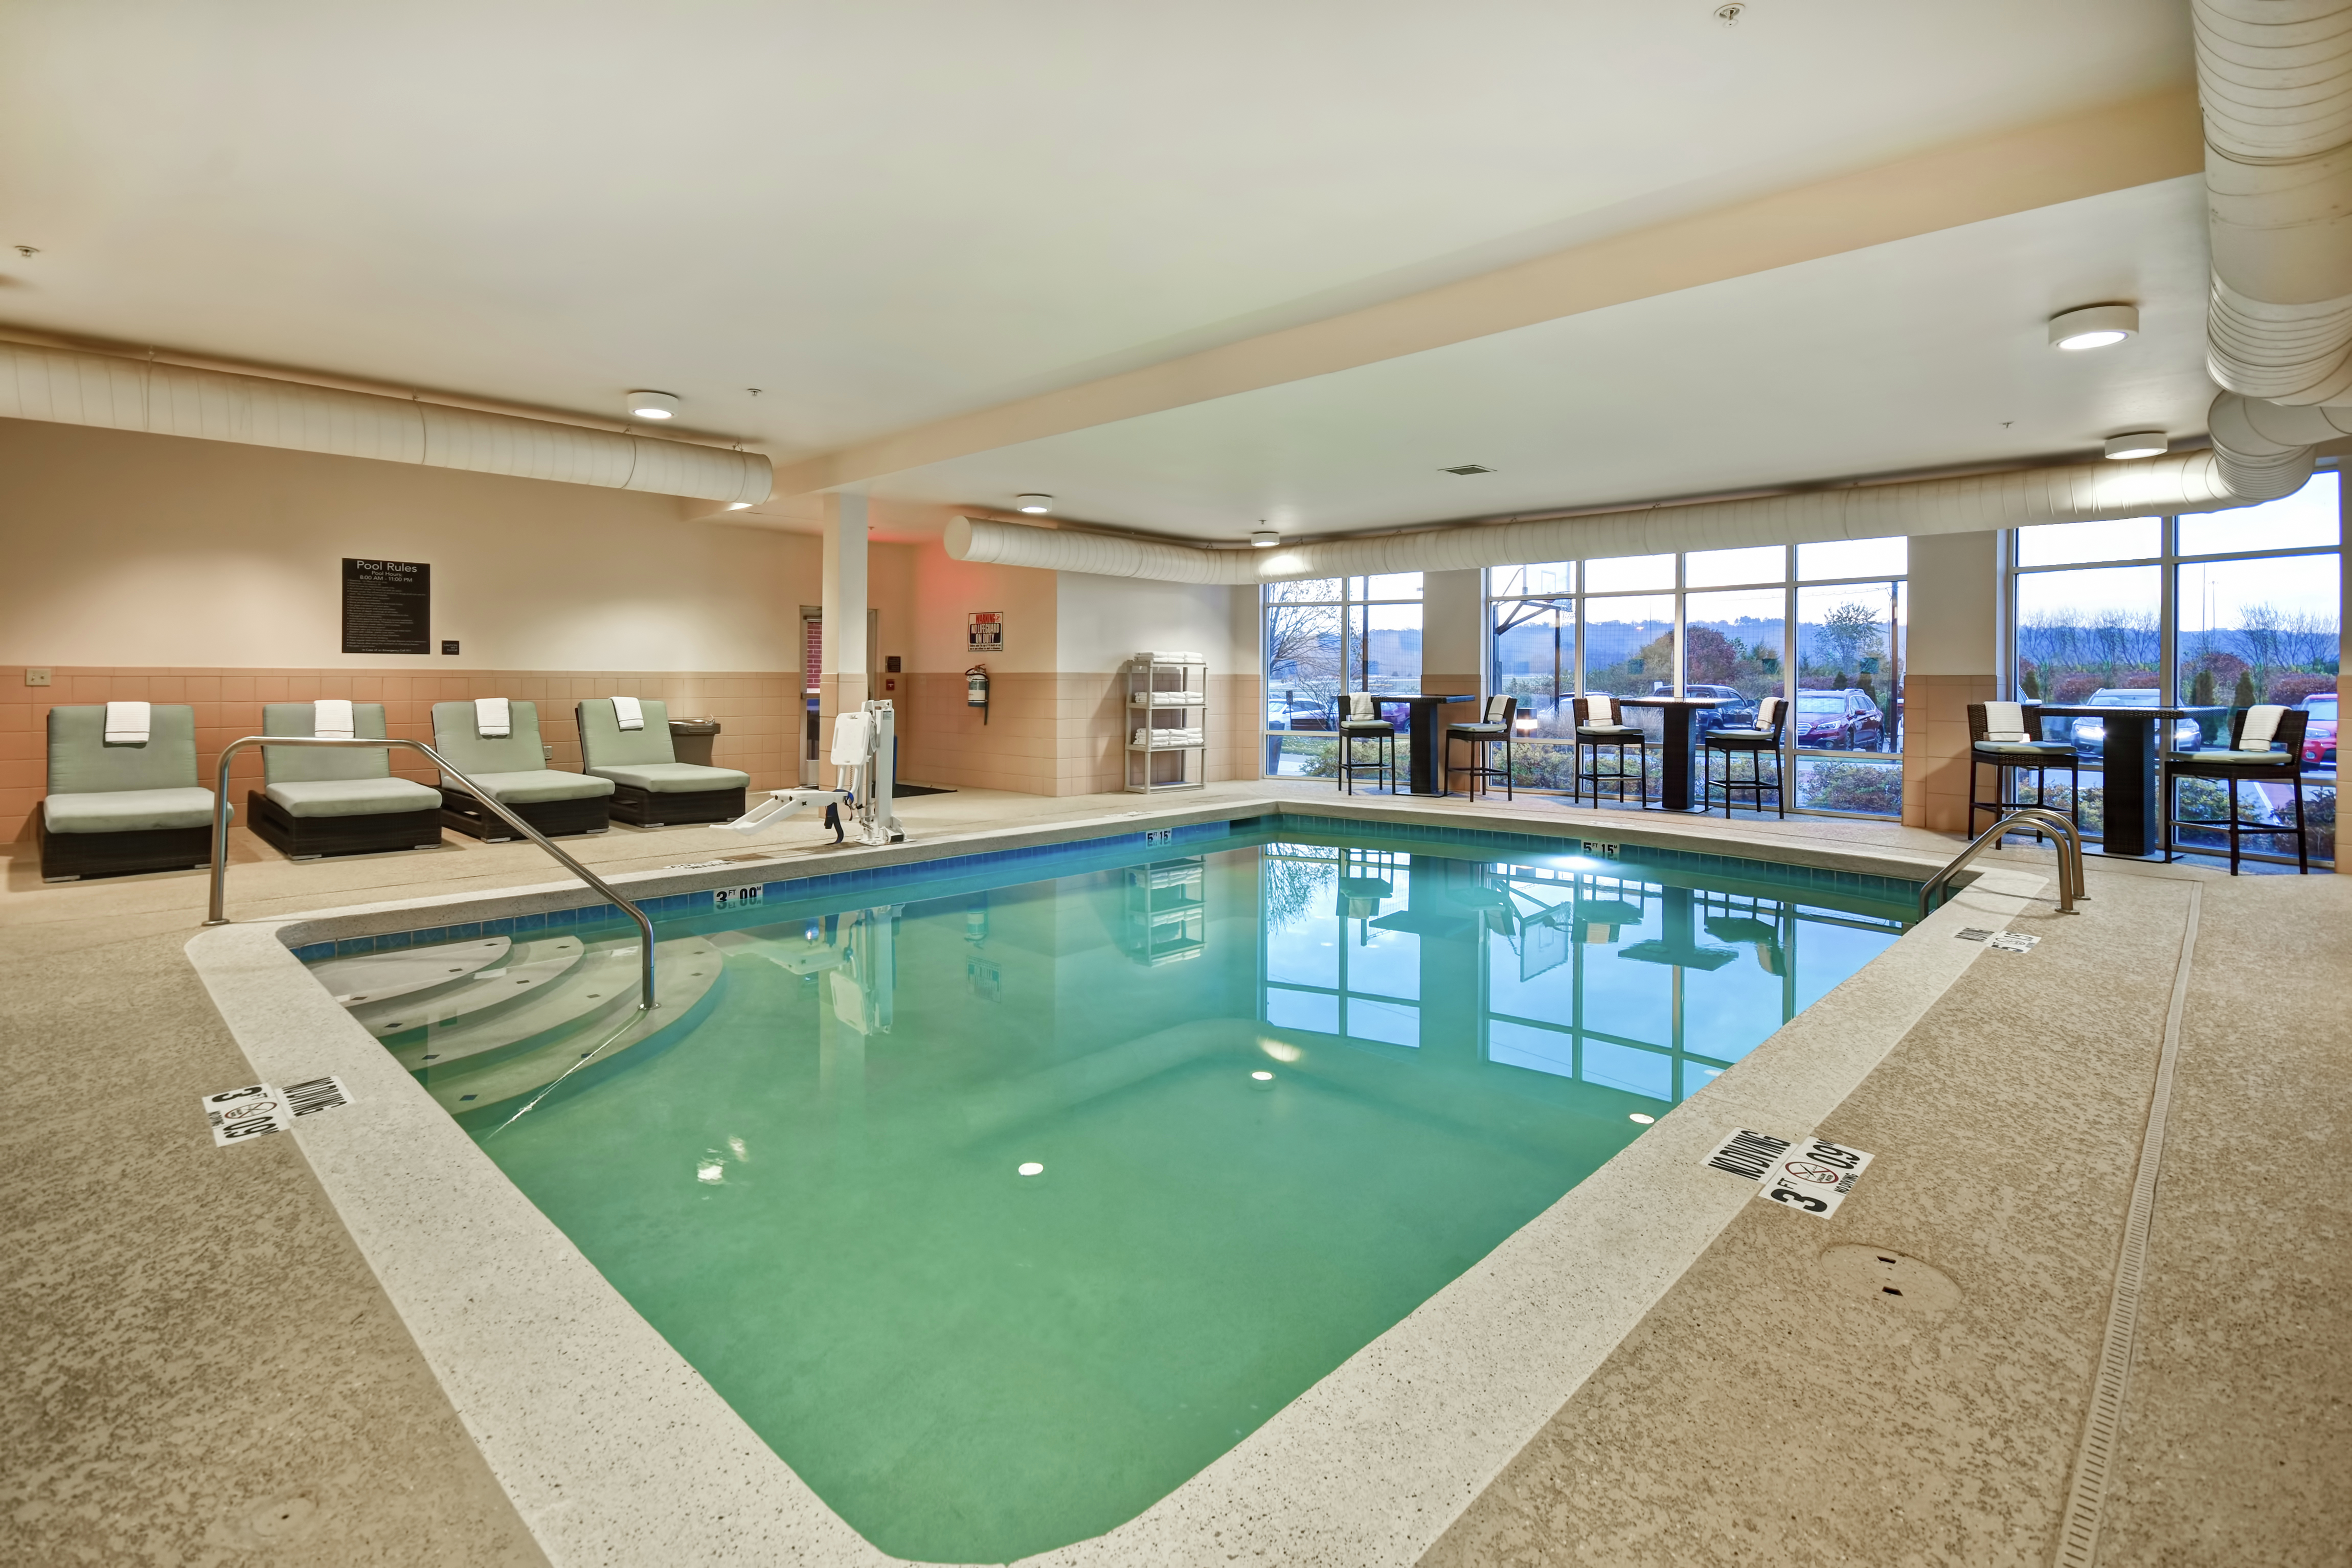 Indoor Pool Area with Large Window View of Surrounding Area